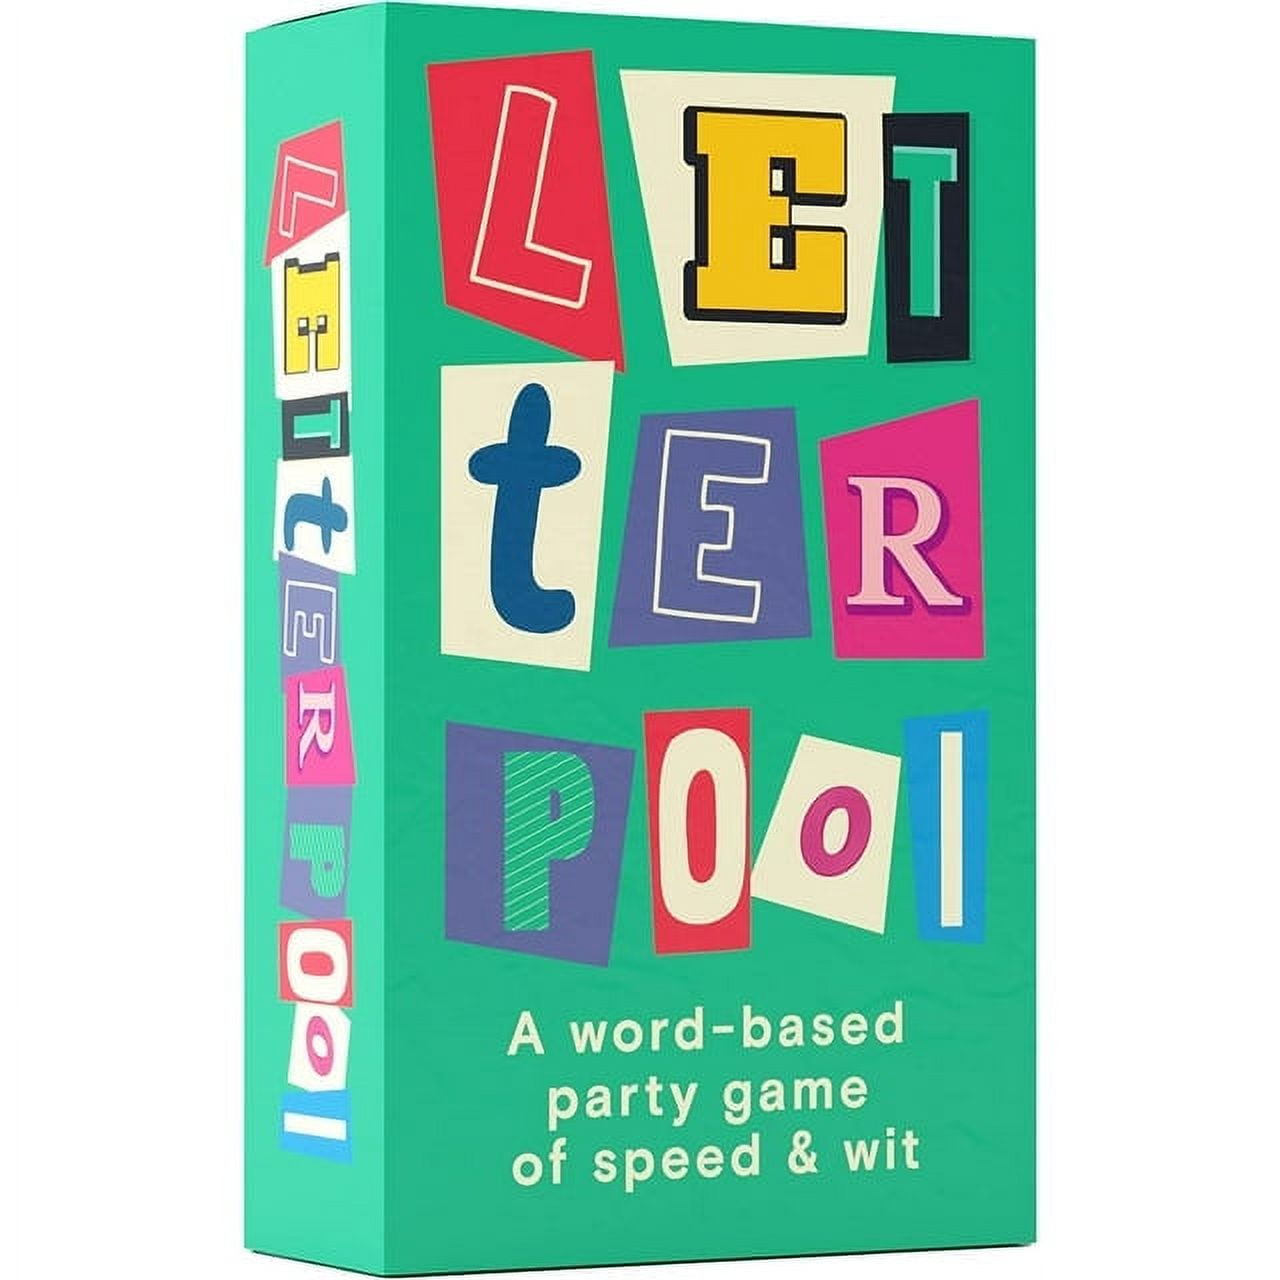 Letterpool Fun Board Games for Adults and Family (2-6 Players